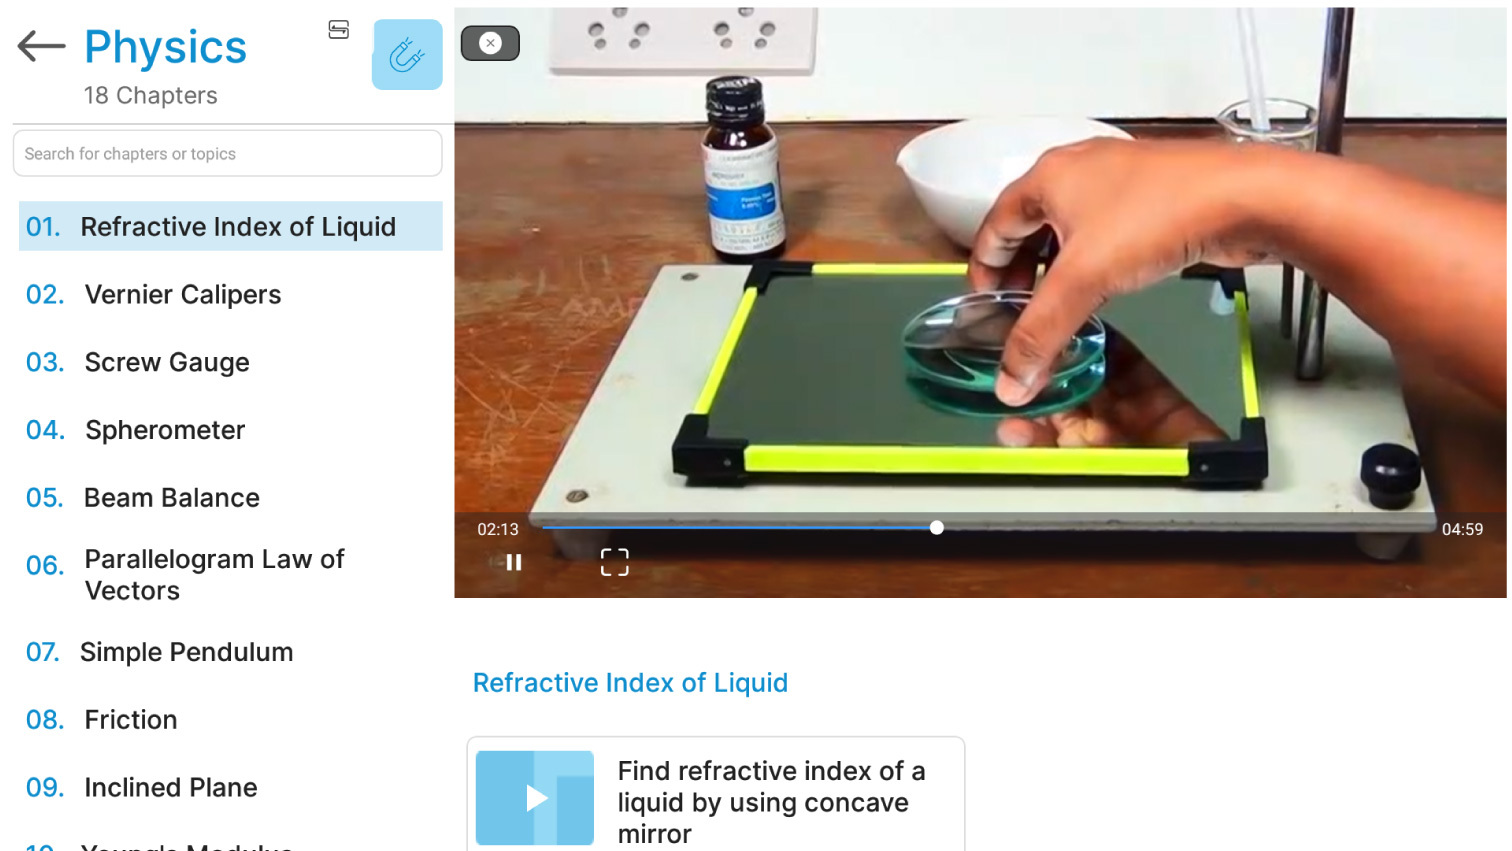 Practical Lab Videos For Digital Learning